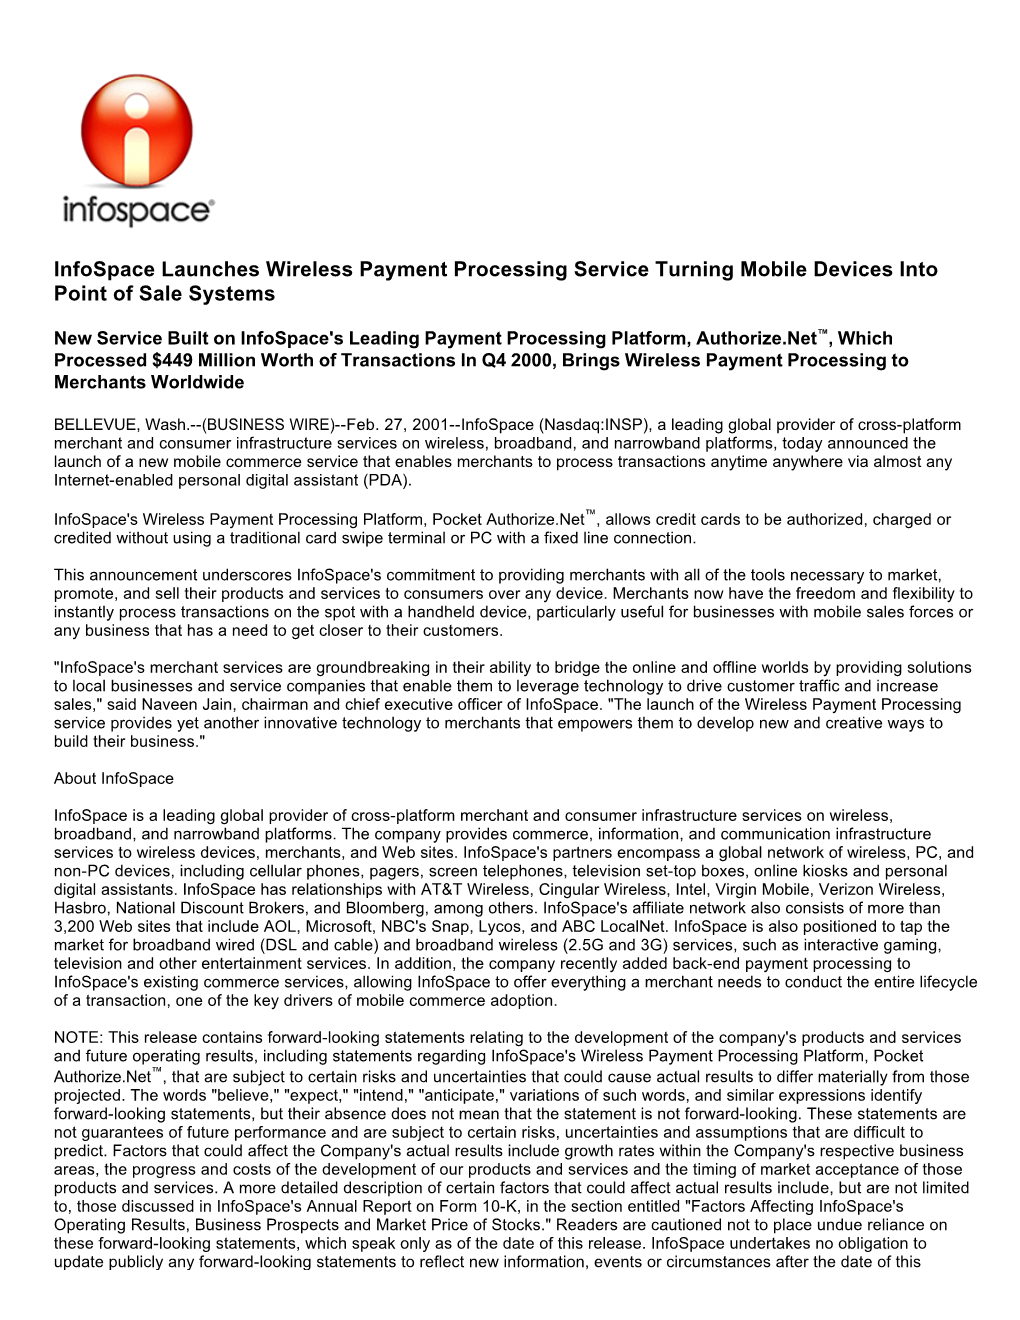 Infospace Launches Wireless Payment Processing Service Turning Mobile Devices Into Point of Sale Systems